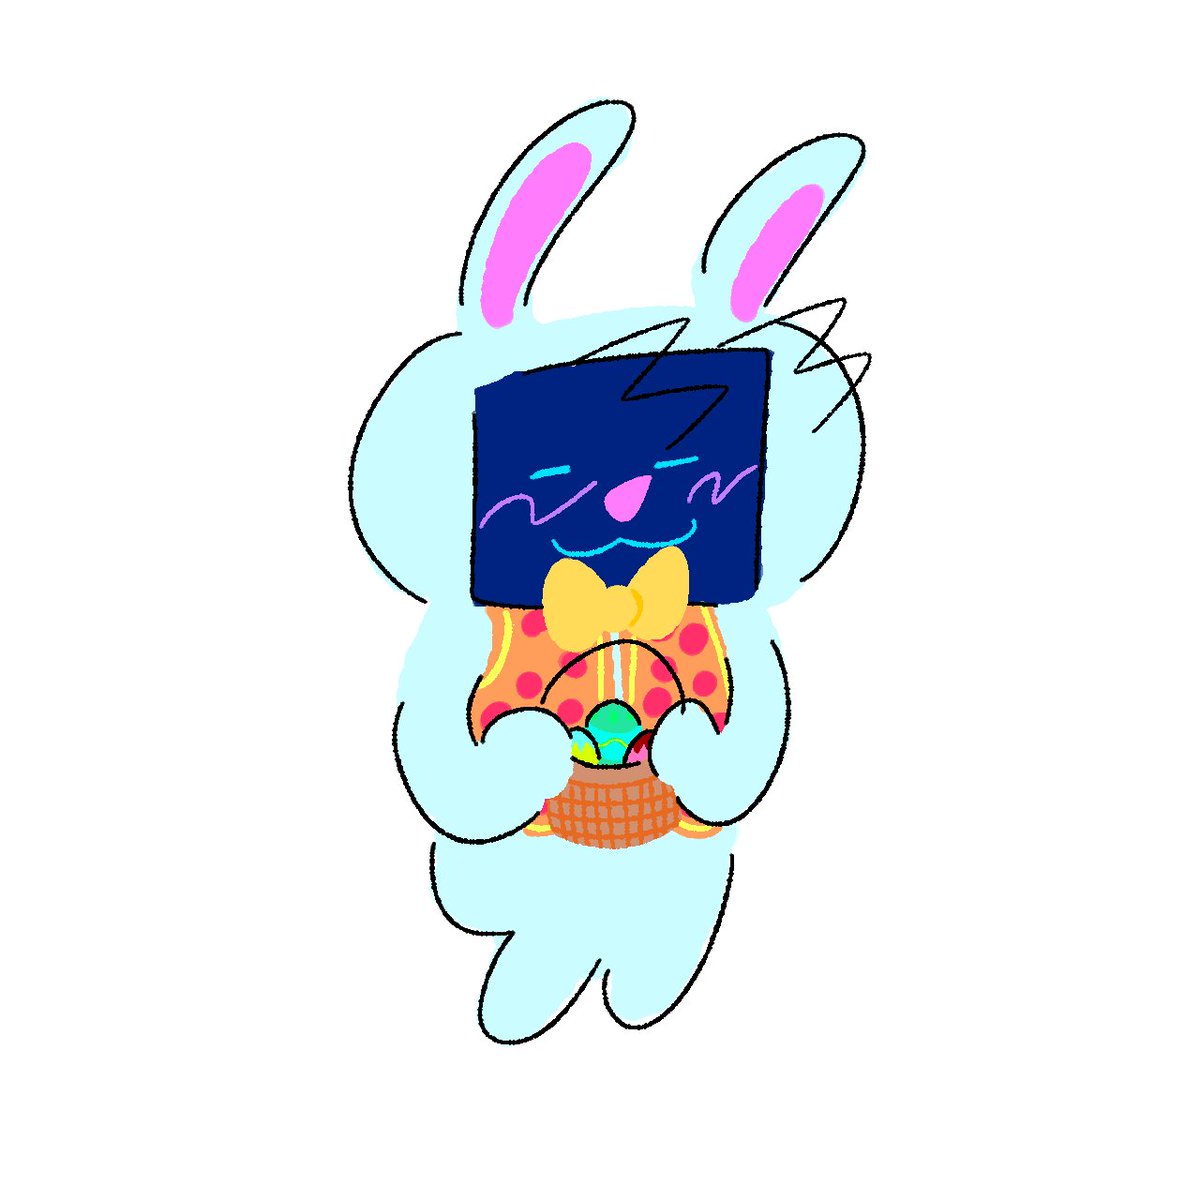 day 97/98 - my wifi COMPLETELY broke yeaterday omg- but besides that LOOK i made a hegg ❤️❤️ #hexfnf #fnfhex #fnf im still drawin yesterdays drawingh so have this bunny hex while i finish it up and post it tmrw :3 !!